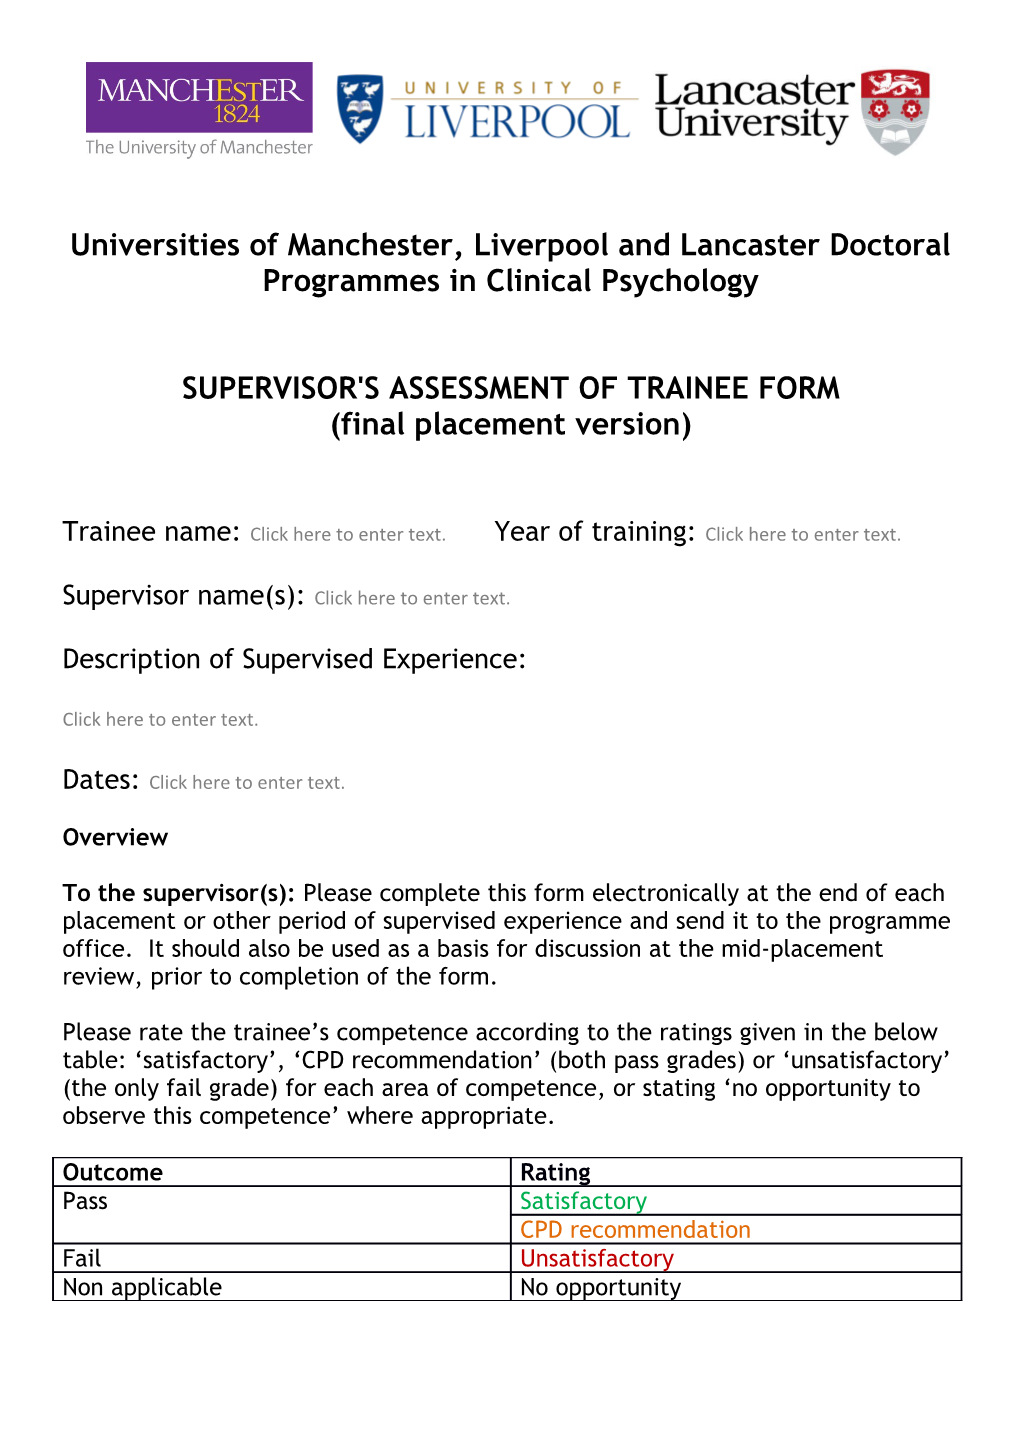 Universities of Manchester, Liverpool and Lancaster Doctoral Programmes in Clinical Psychology